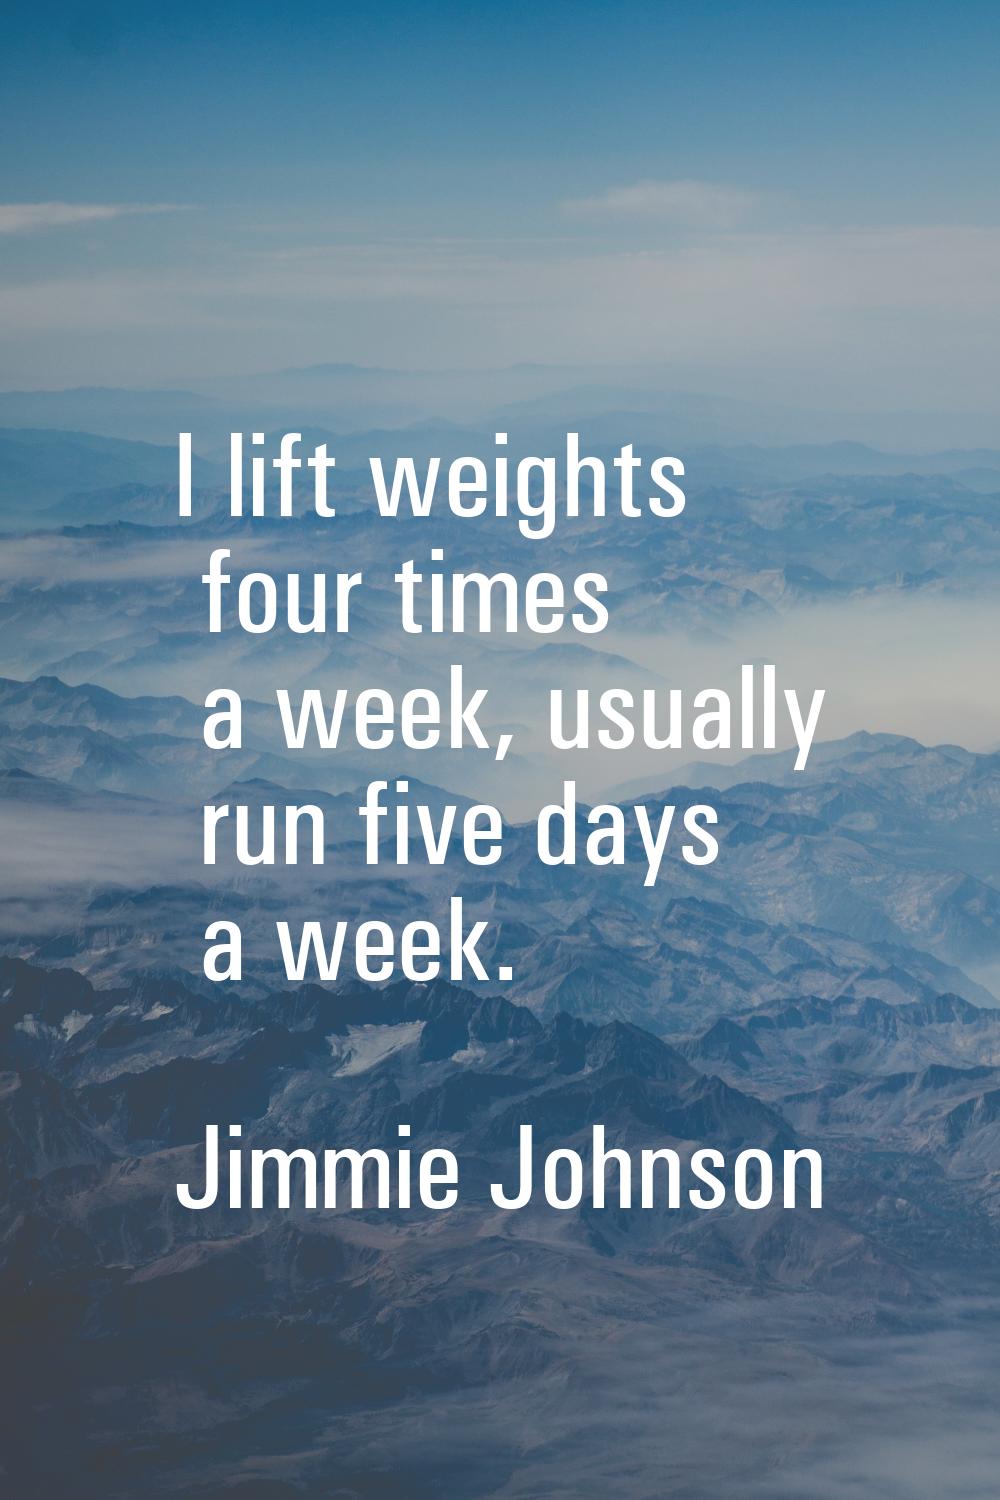 I lift weights four times a week, usually run five days a week.